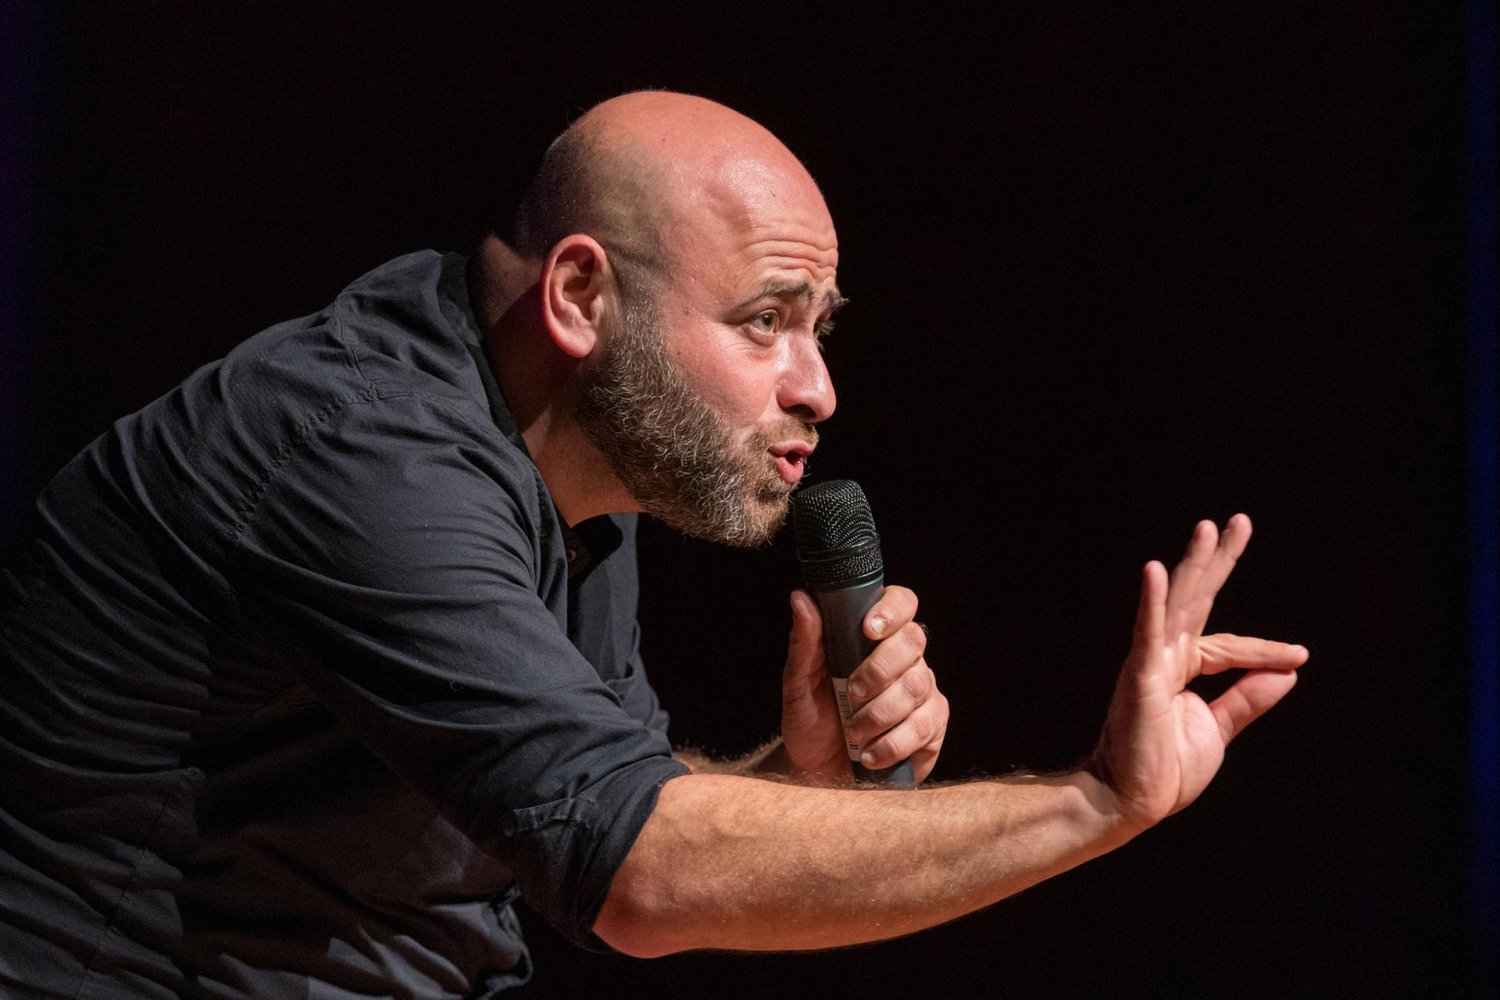 Comedian Nidal Badarneh performs a stand-up show at a music festival in Jerusalem on September 19, 2022